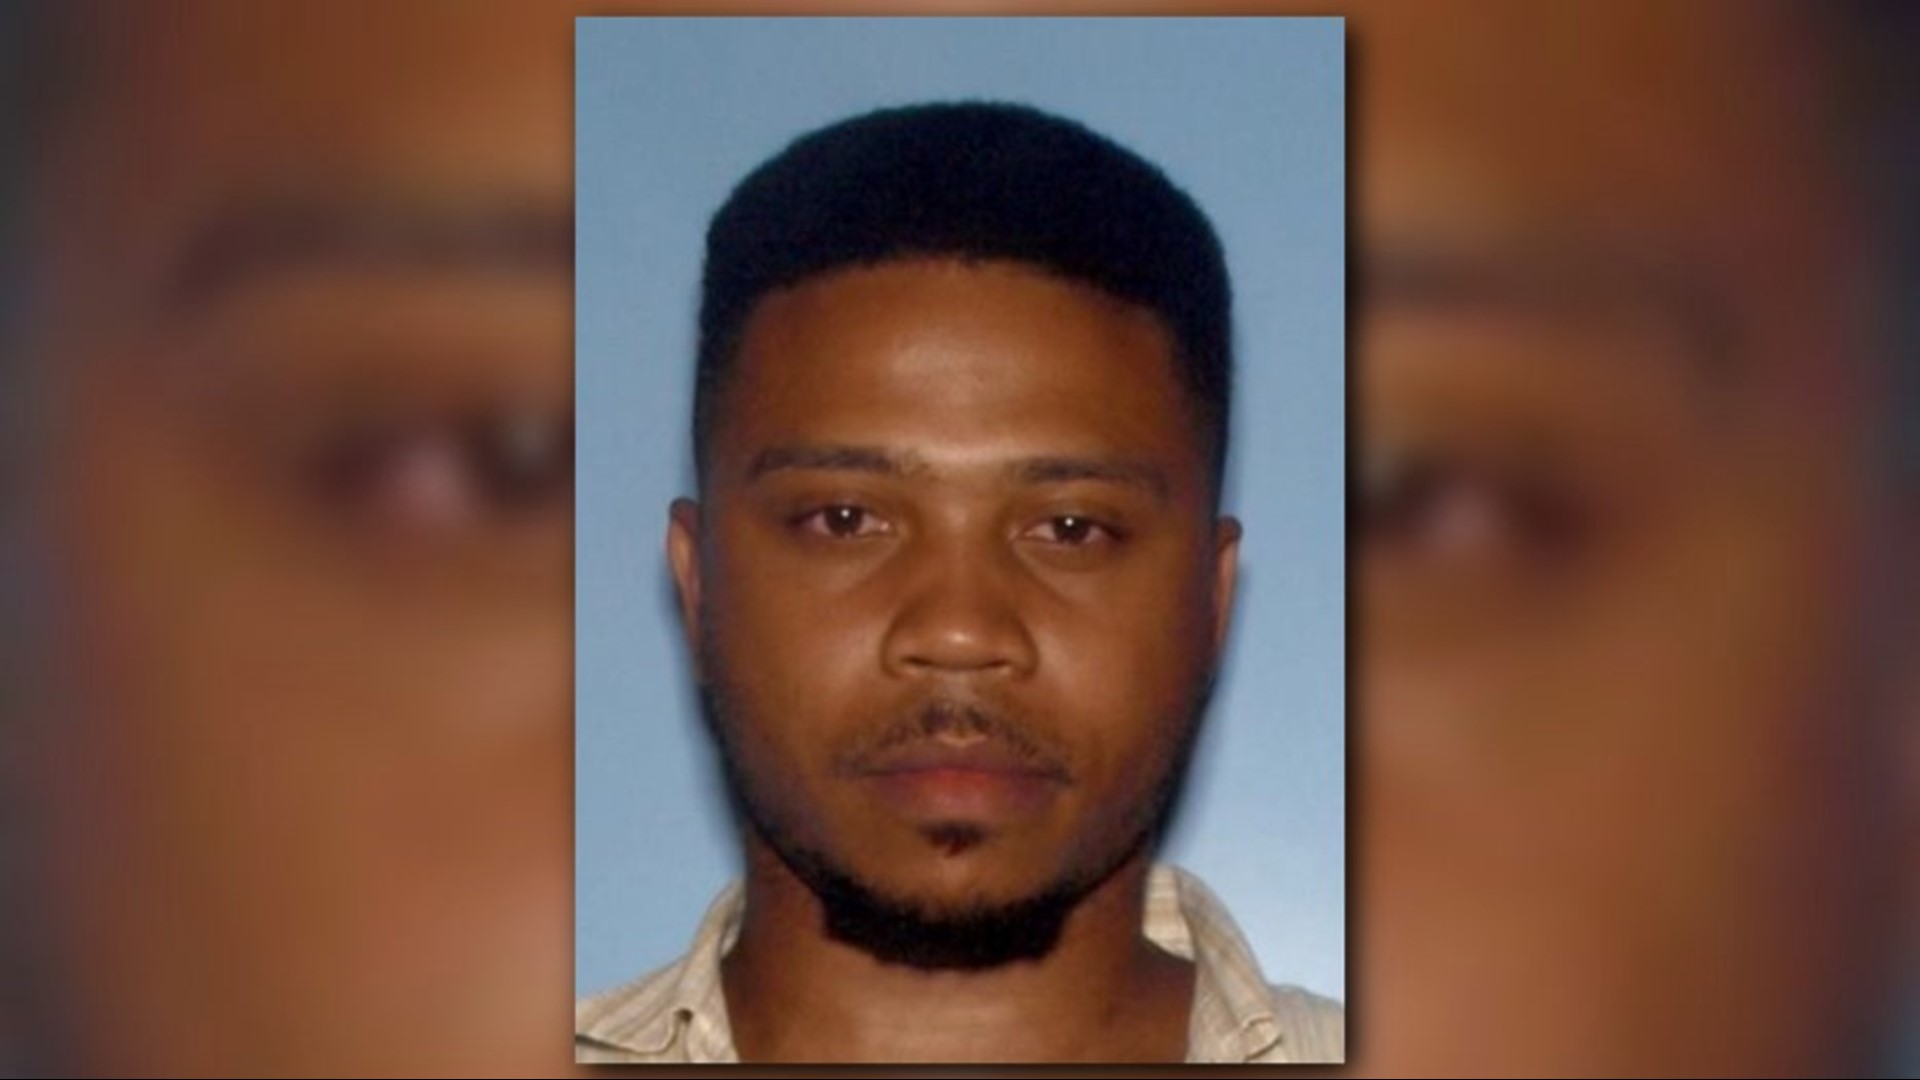 Murder suspect on Clayton County sheriff's "Top 10 Most Wanted' list